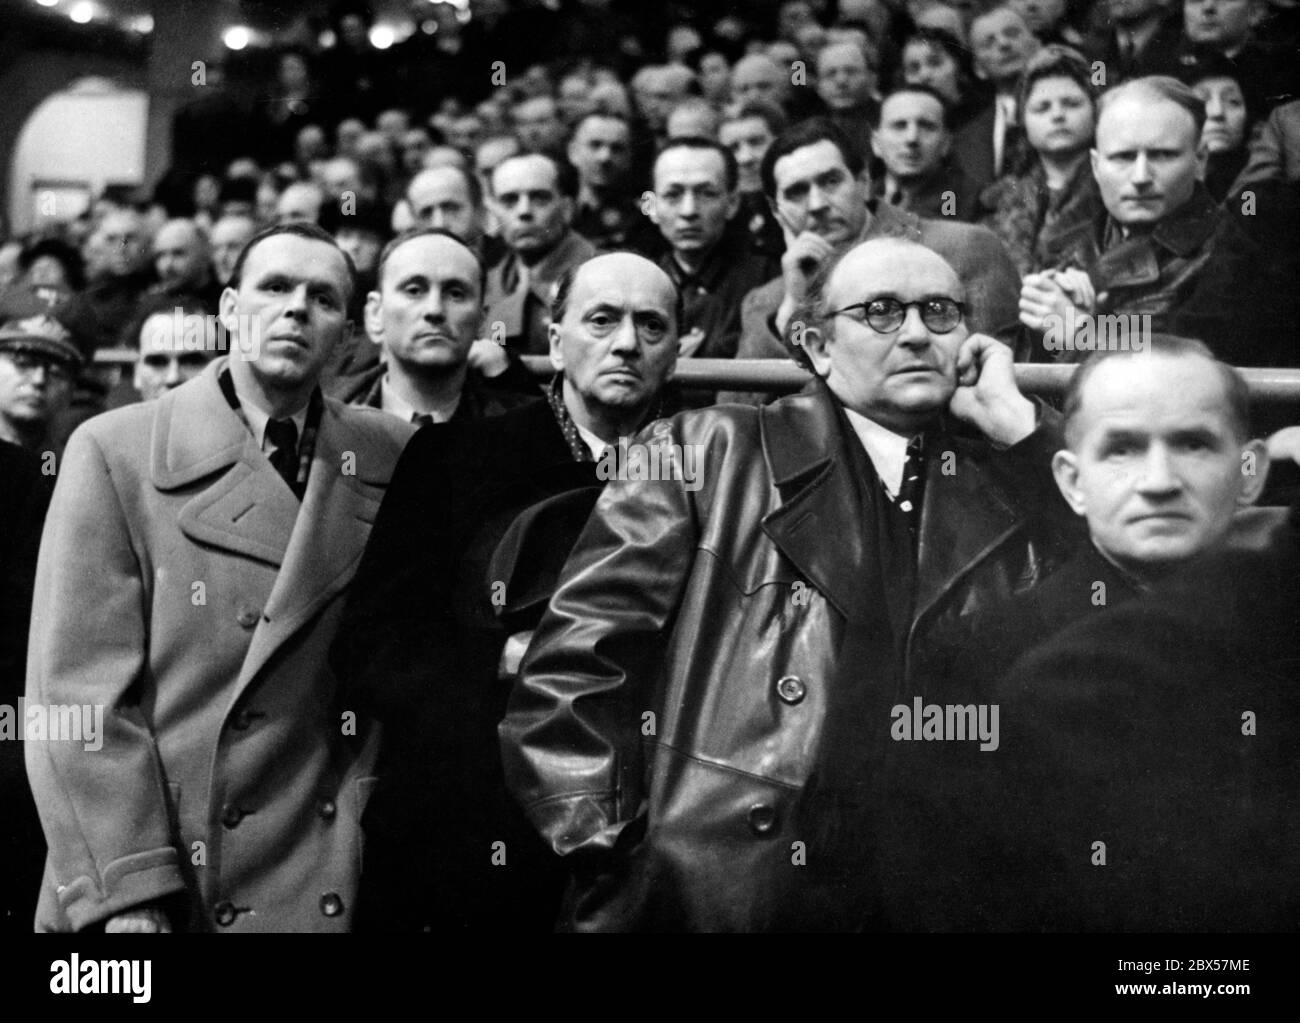 The actors Eugen Kloepfer, Thoedor Loos and behind them Bernhard Minetti are also among the audience in the Sportpalast during the demagogic speech of Reich Minister of Propaganda Joseph Goebbels. Photo: Schwahn Stock Photo